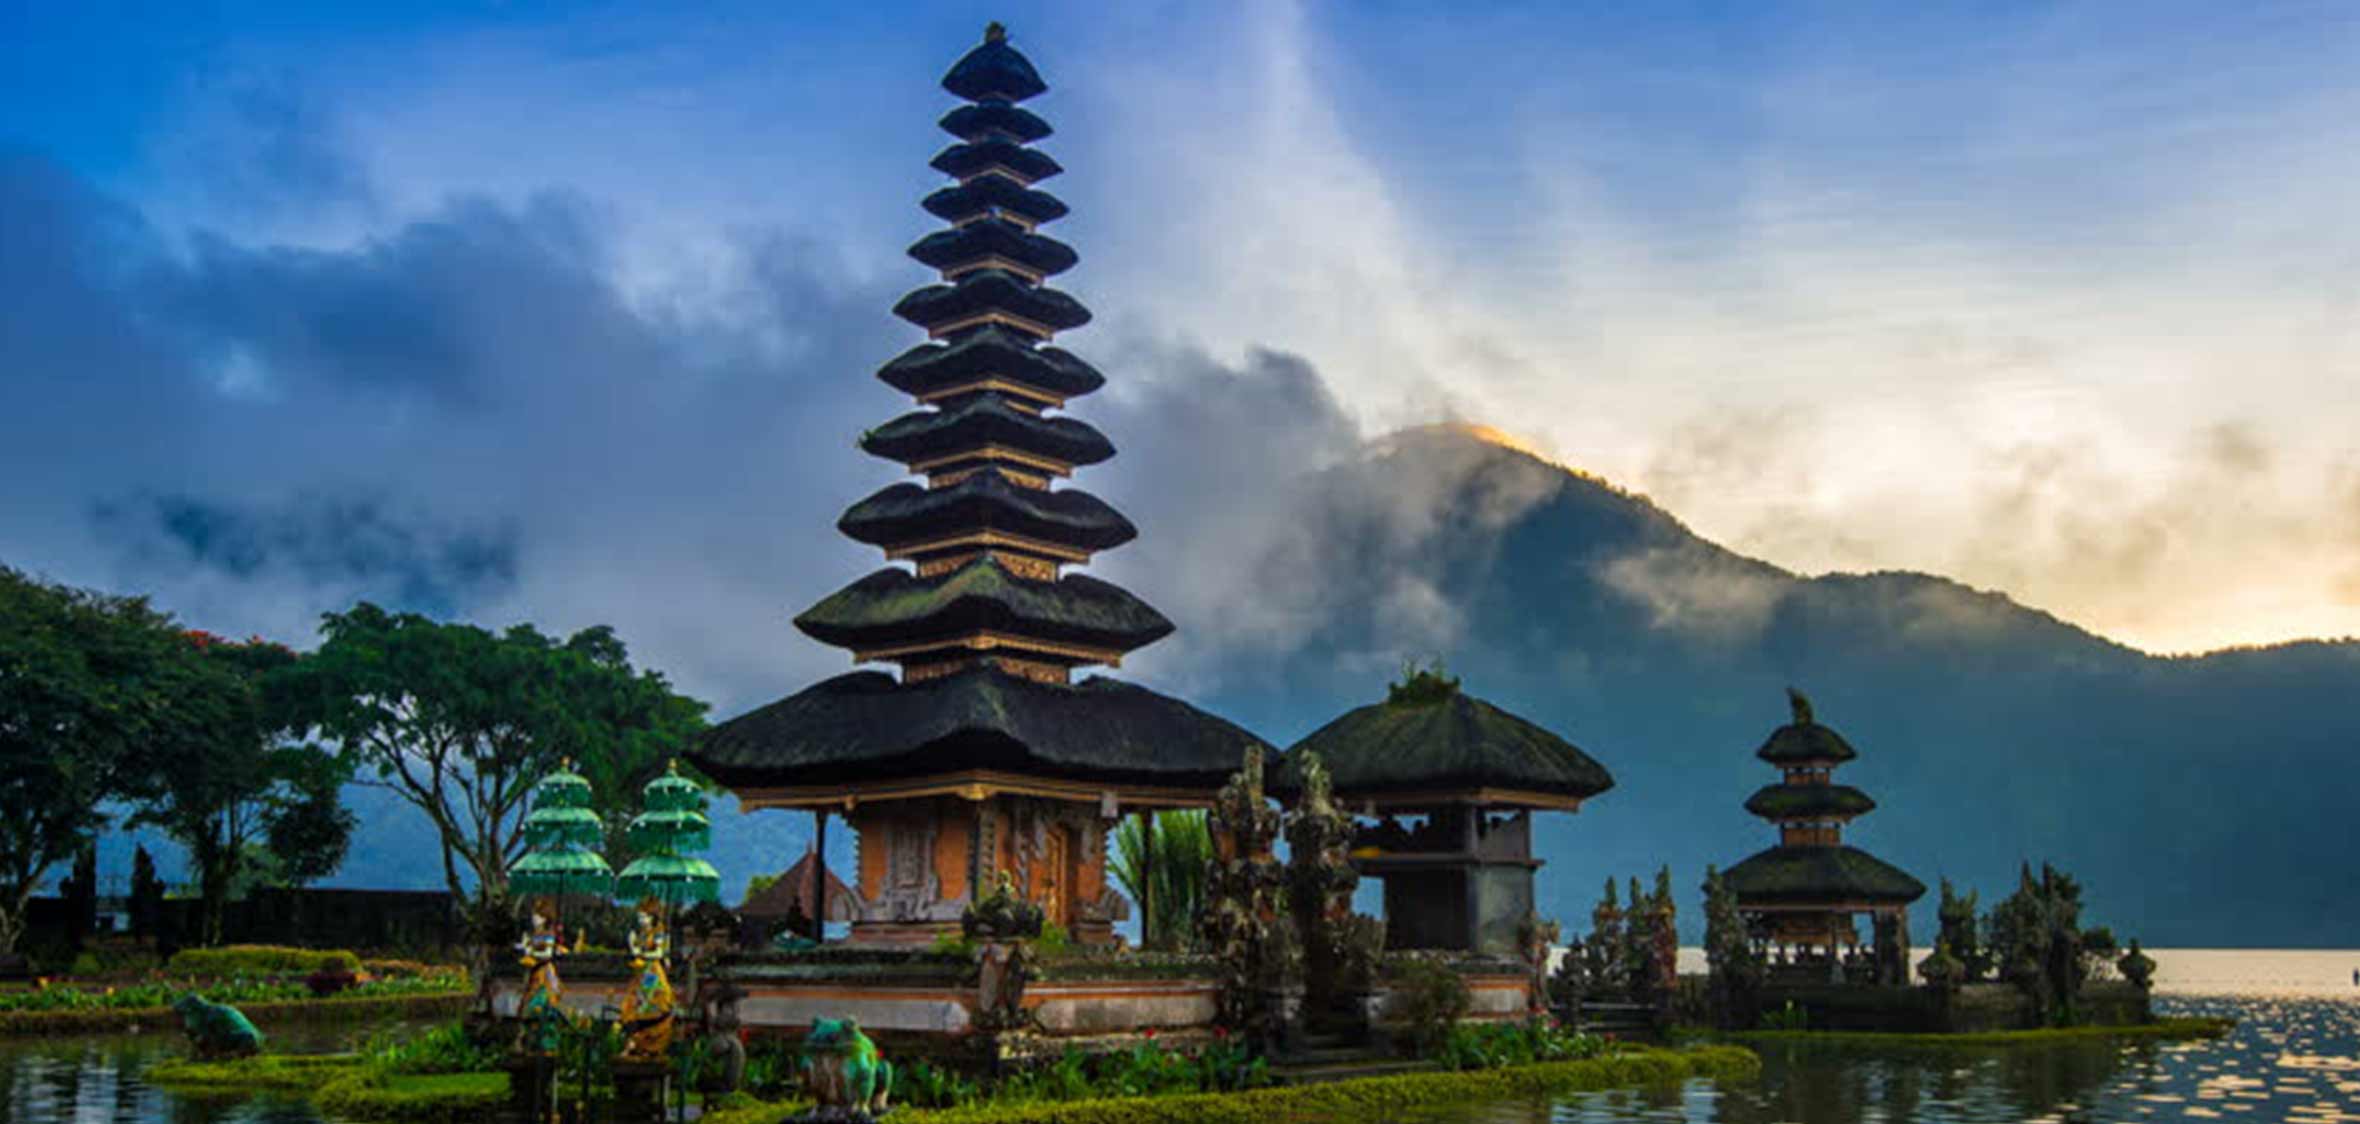 Balinese temple on the water